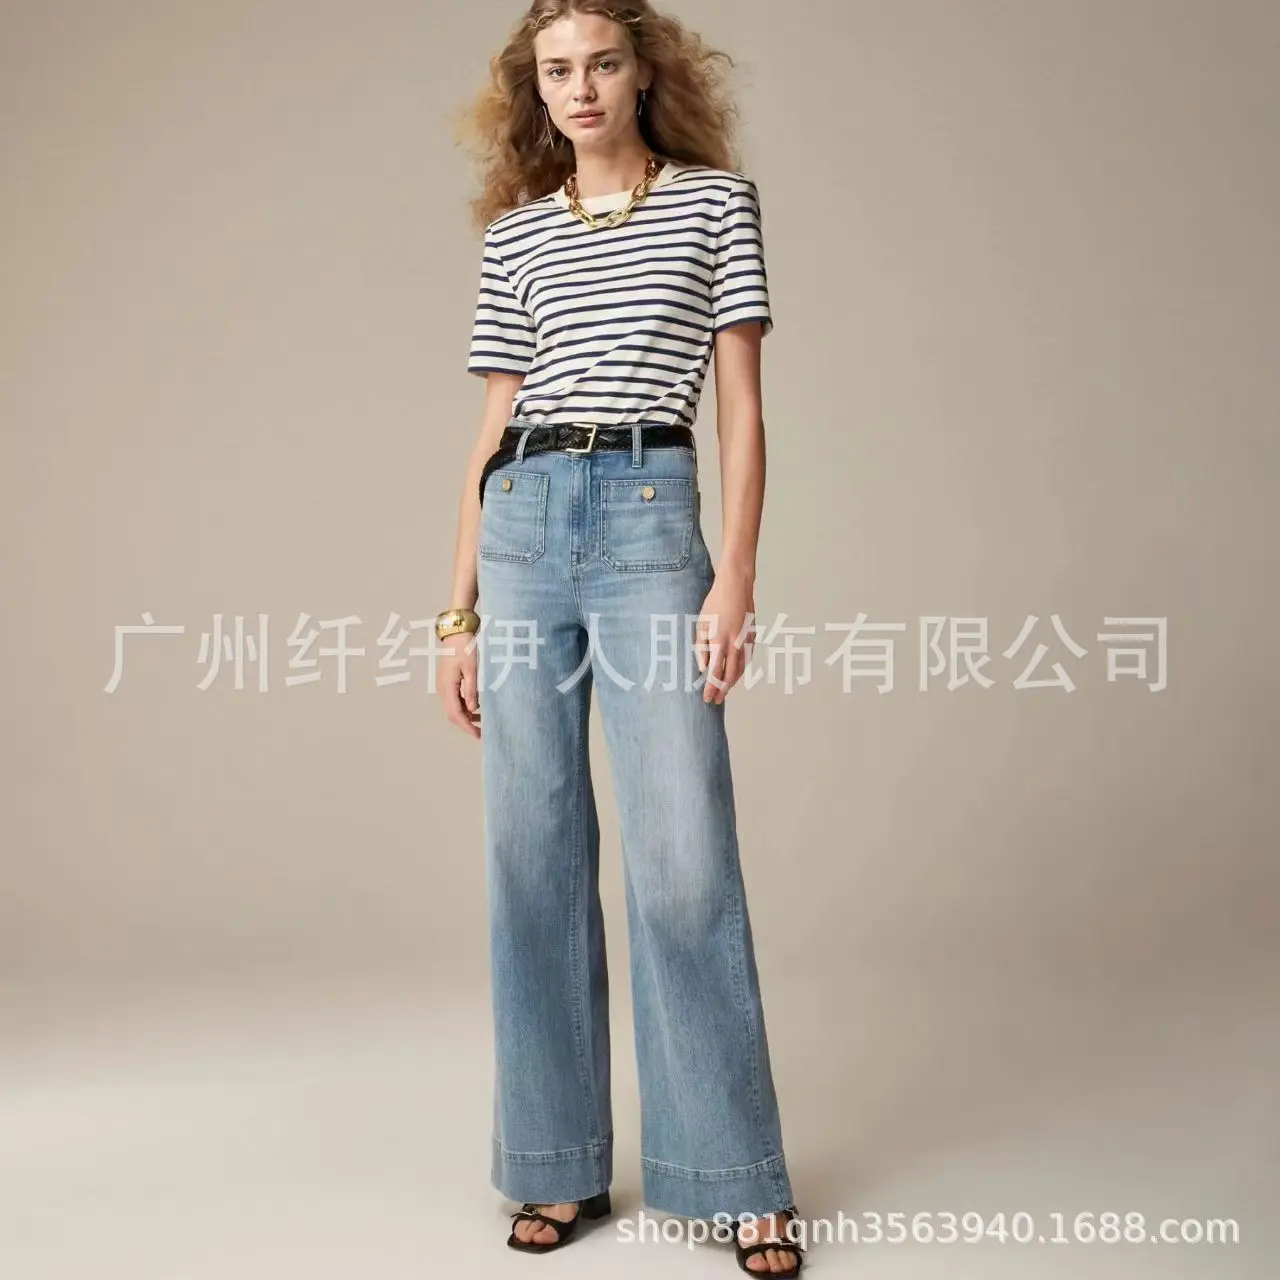 

Women's Jeans Denim Pants Clothing New Loose Wide Leg Casual Bleached Button Slightly Flared Jeans Full Length